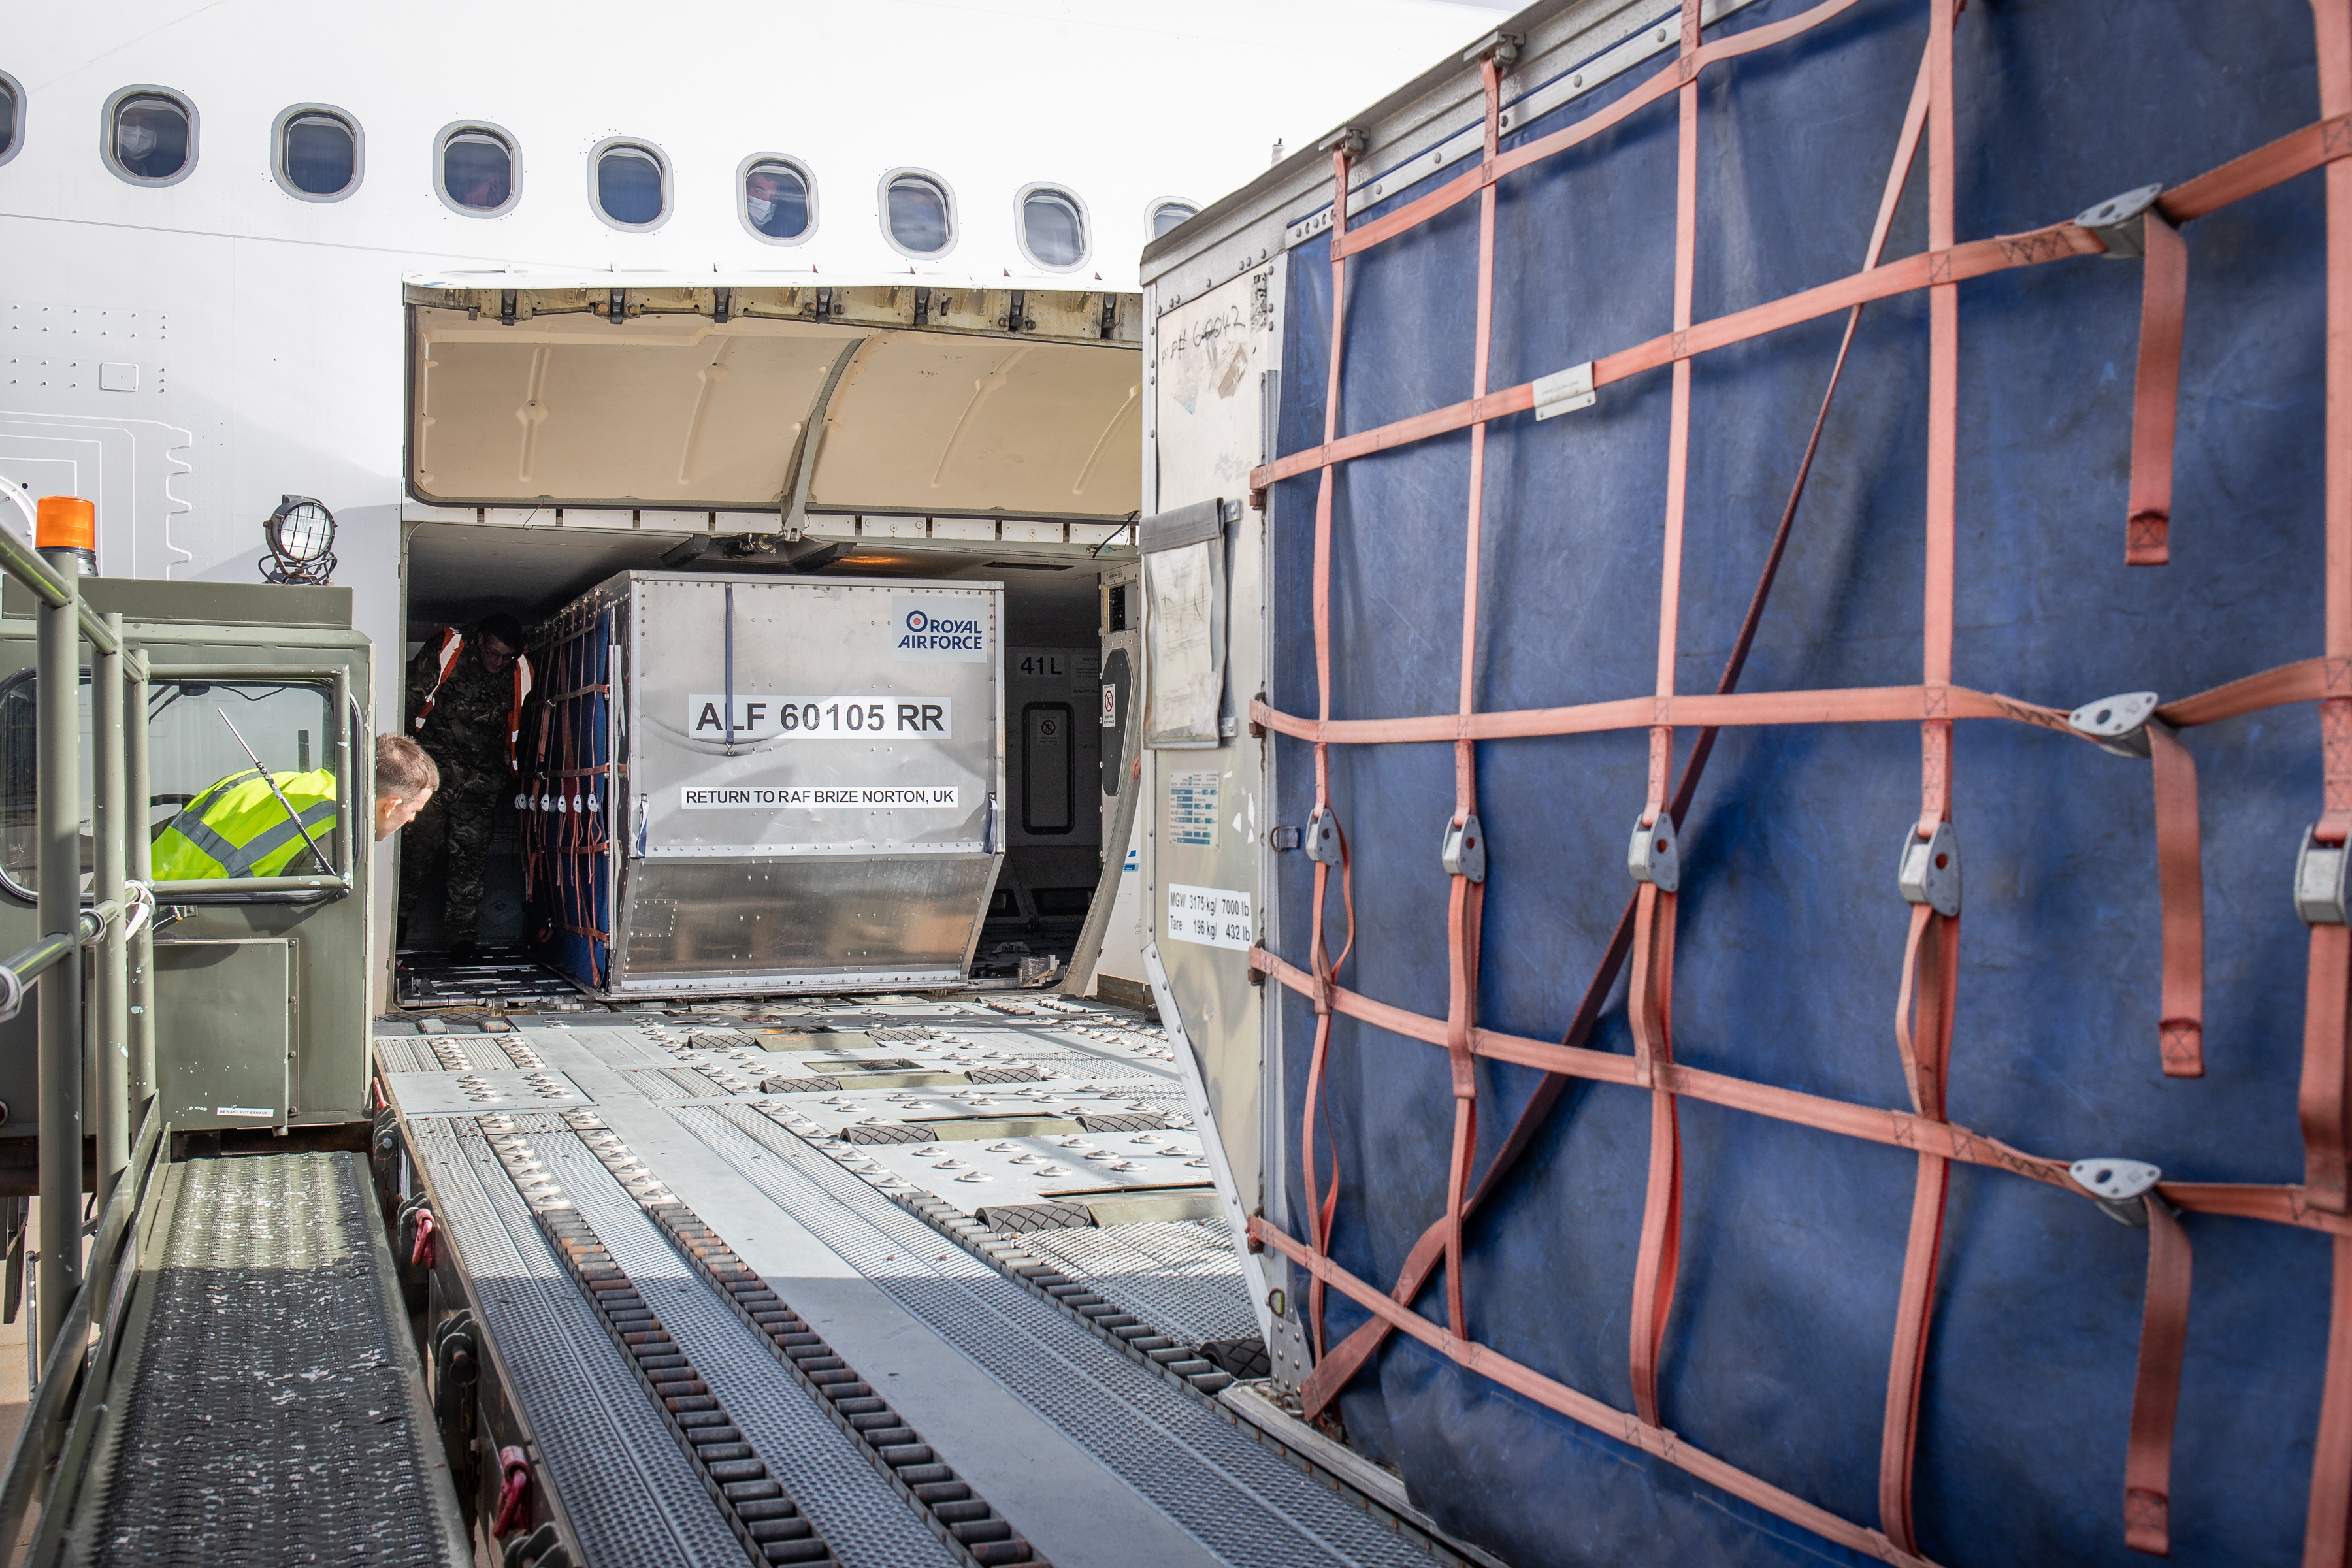 Metal cargo container moved on escalator into carrier aircraft.